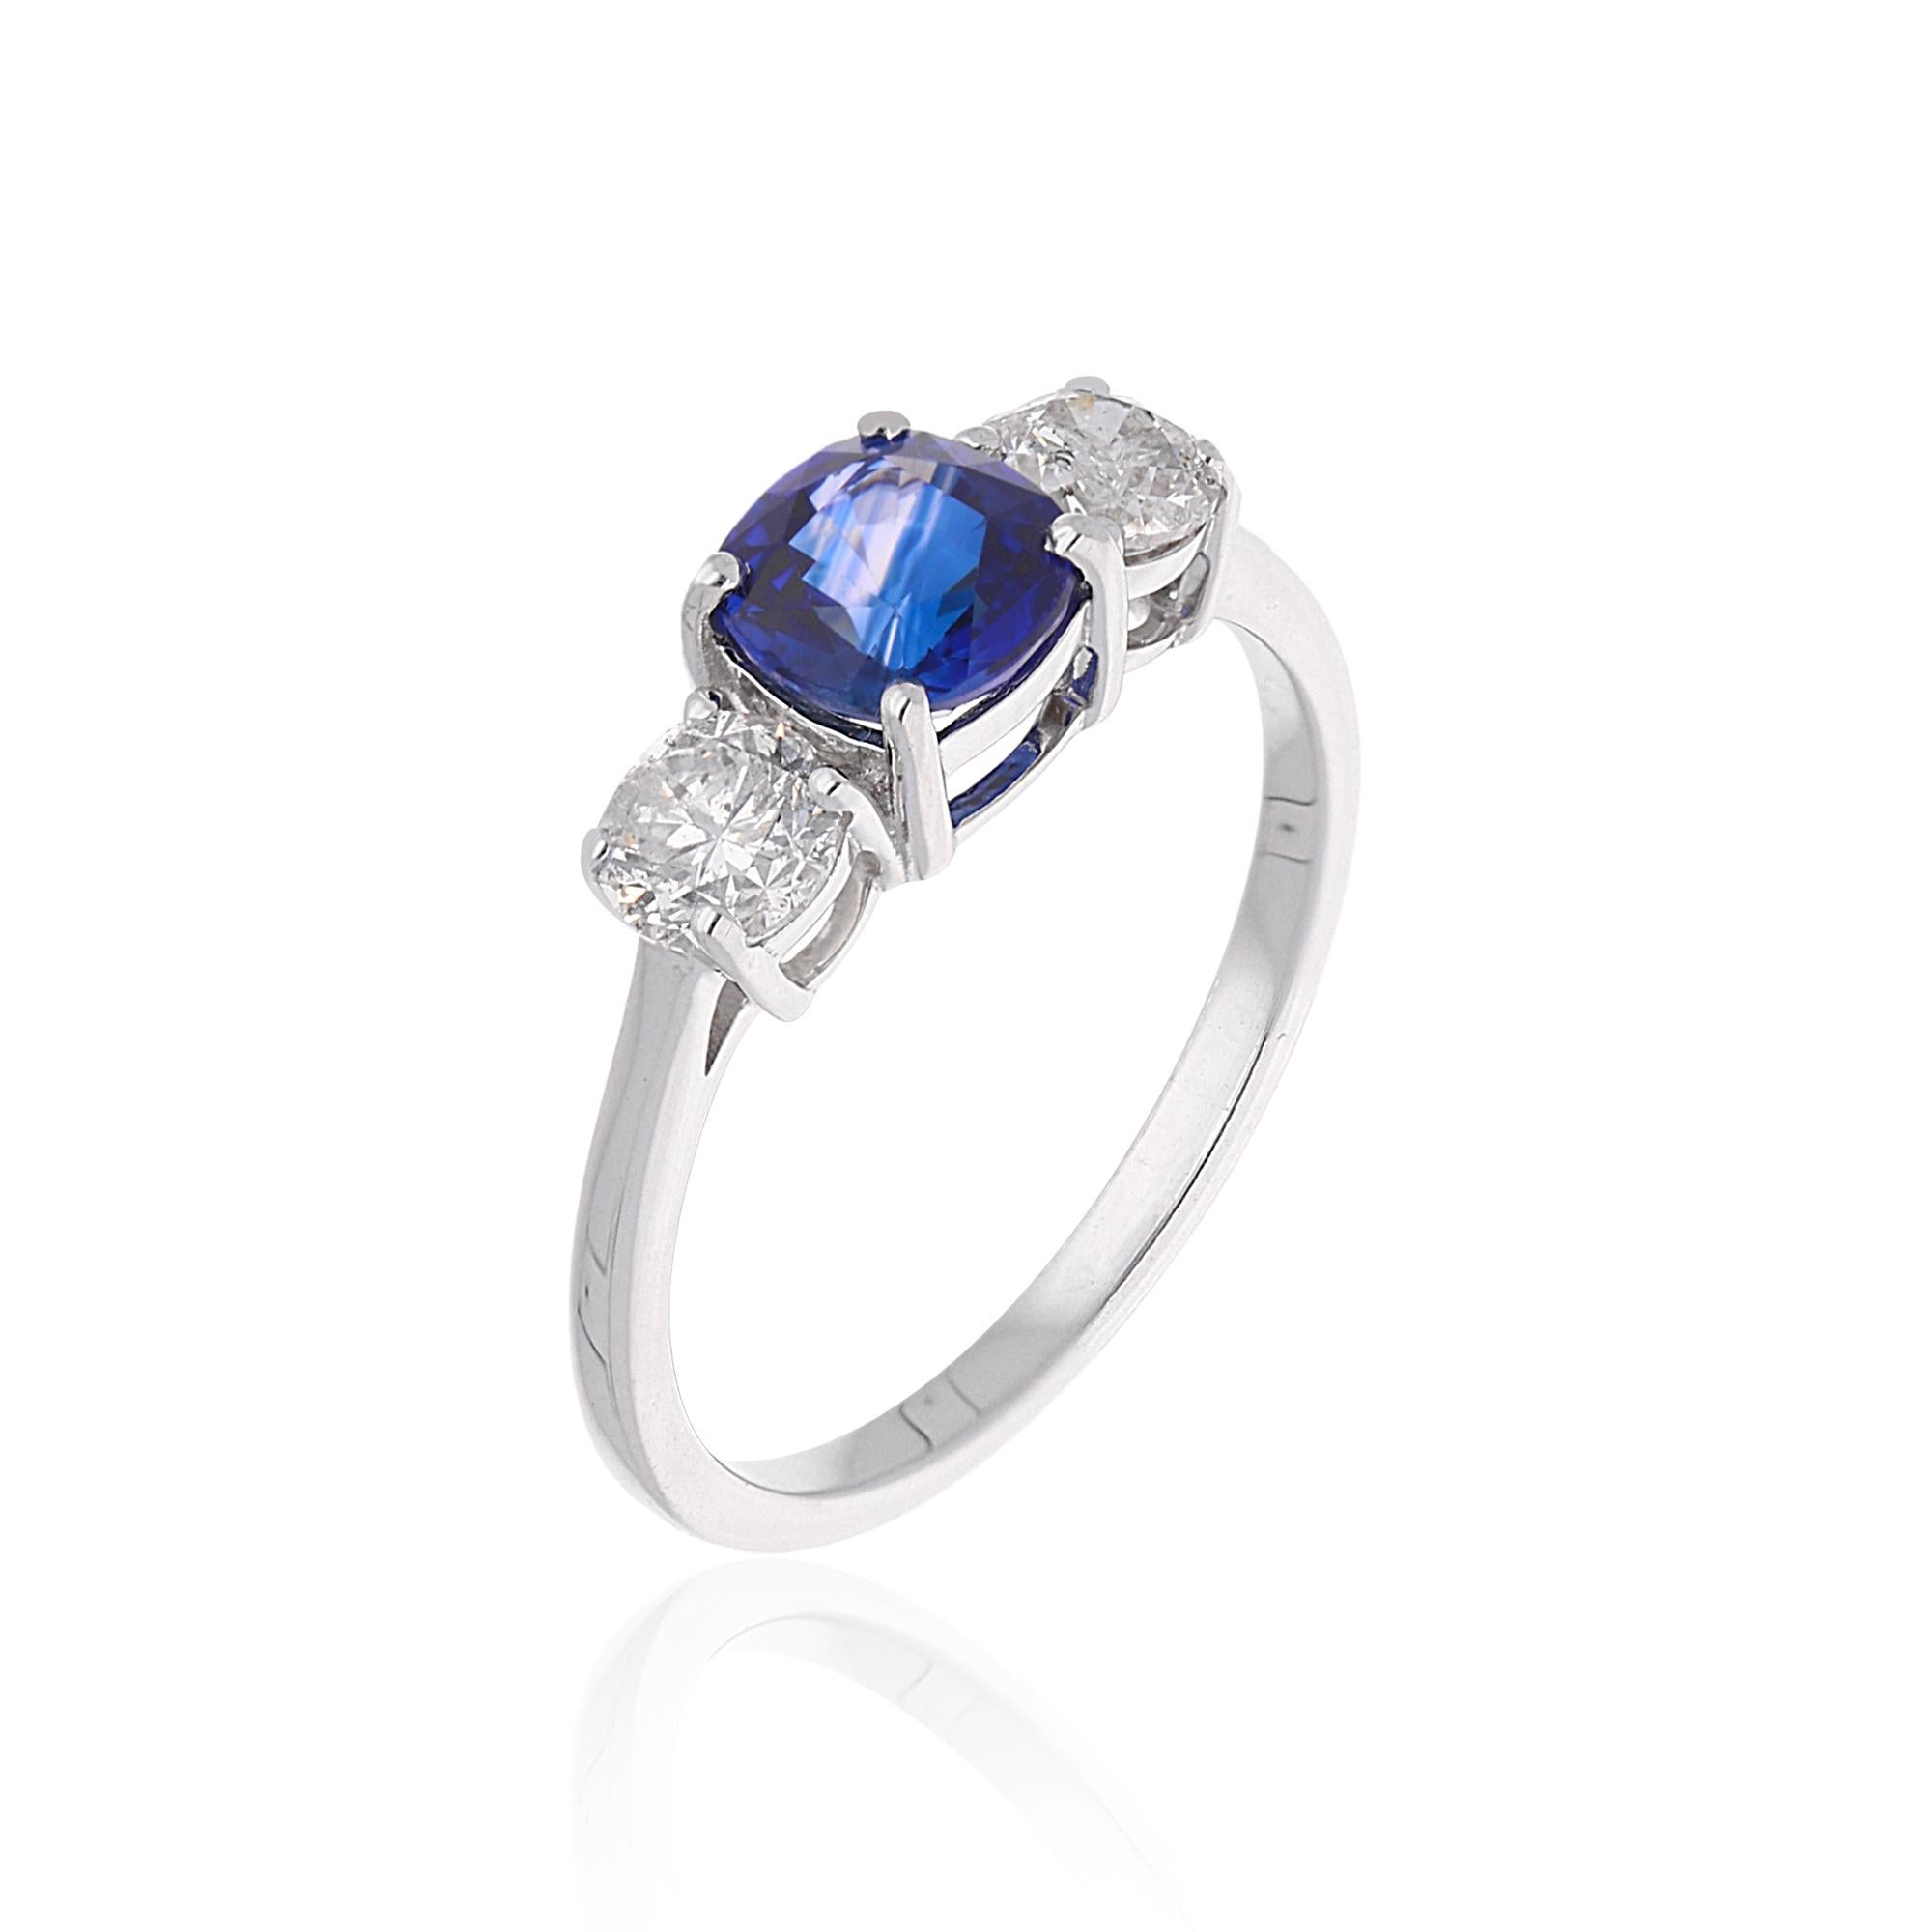 Item Code :- SER-22413
Gross Wt. :- 2.95 gm
18k Solid White Gold Wt. :- 2.55 gm
Natural Diamond Wt. :- 0.75 Ct. ( AVERAGE DIAMOND CLARITY SI1-SI2 & COLOR H-I )
Blue Sapphire Wt. :- 1.26 Ct.
Ring Size :- 7 US & All size available

≫ FAQ below for